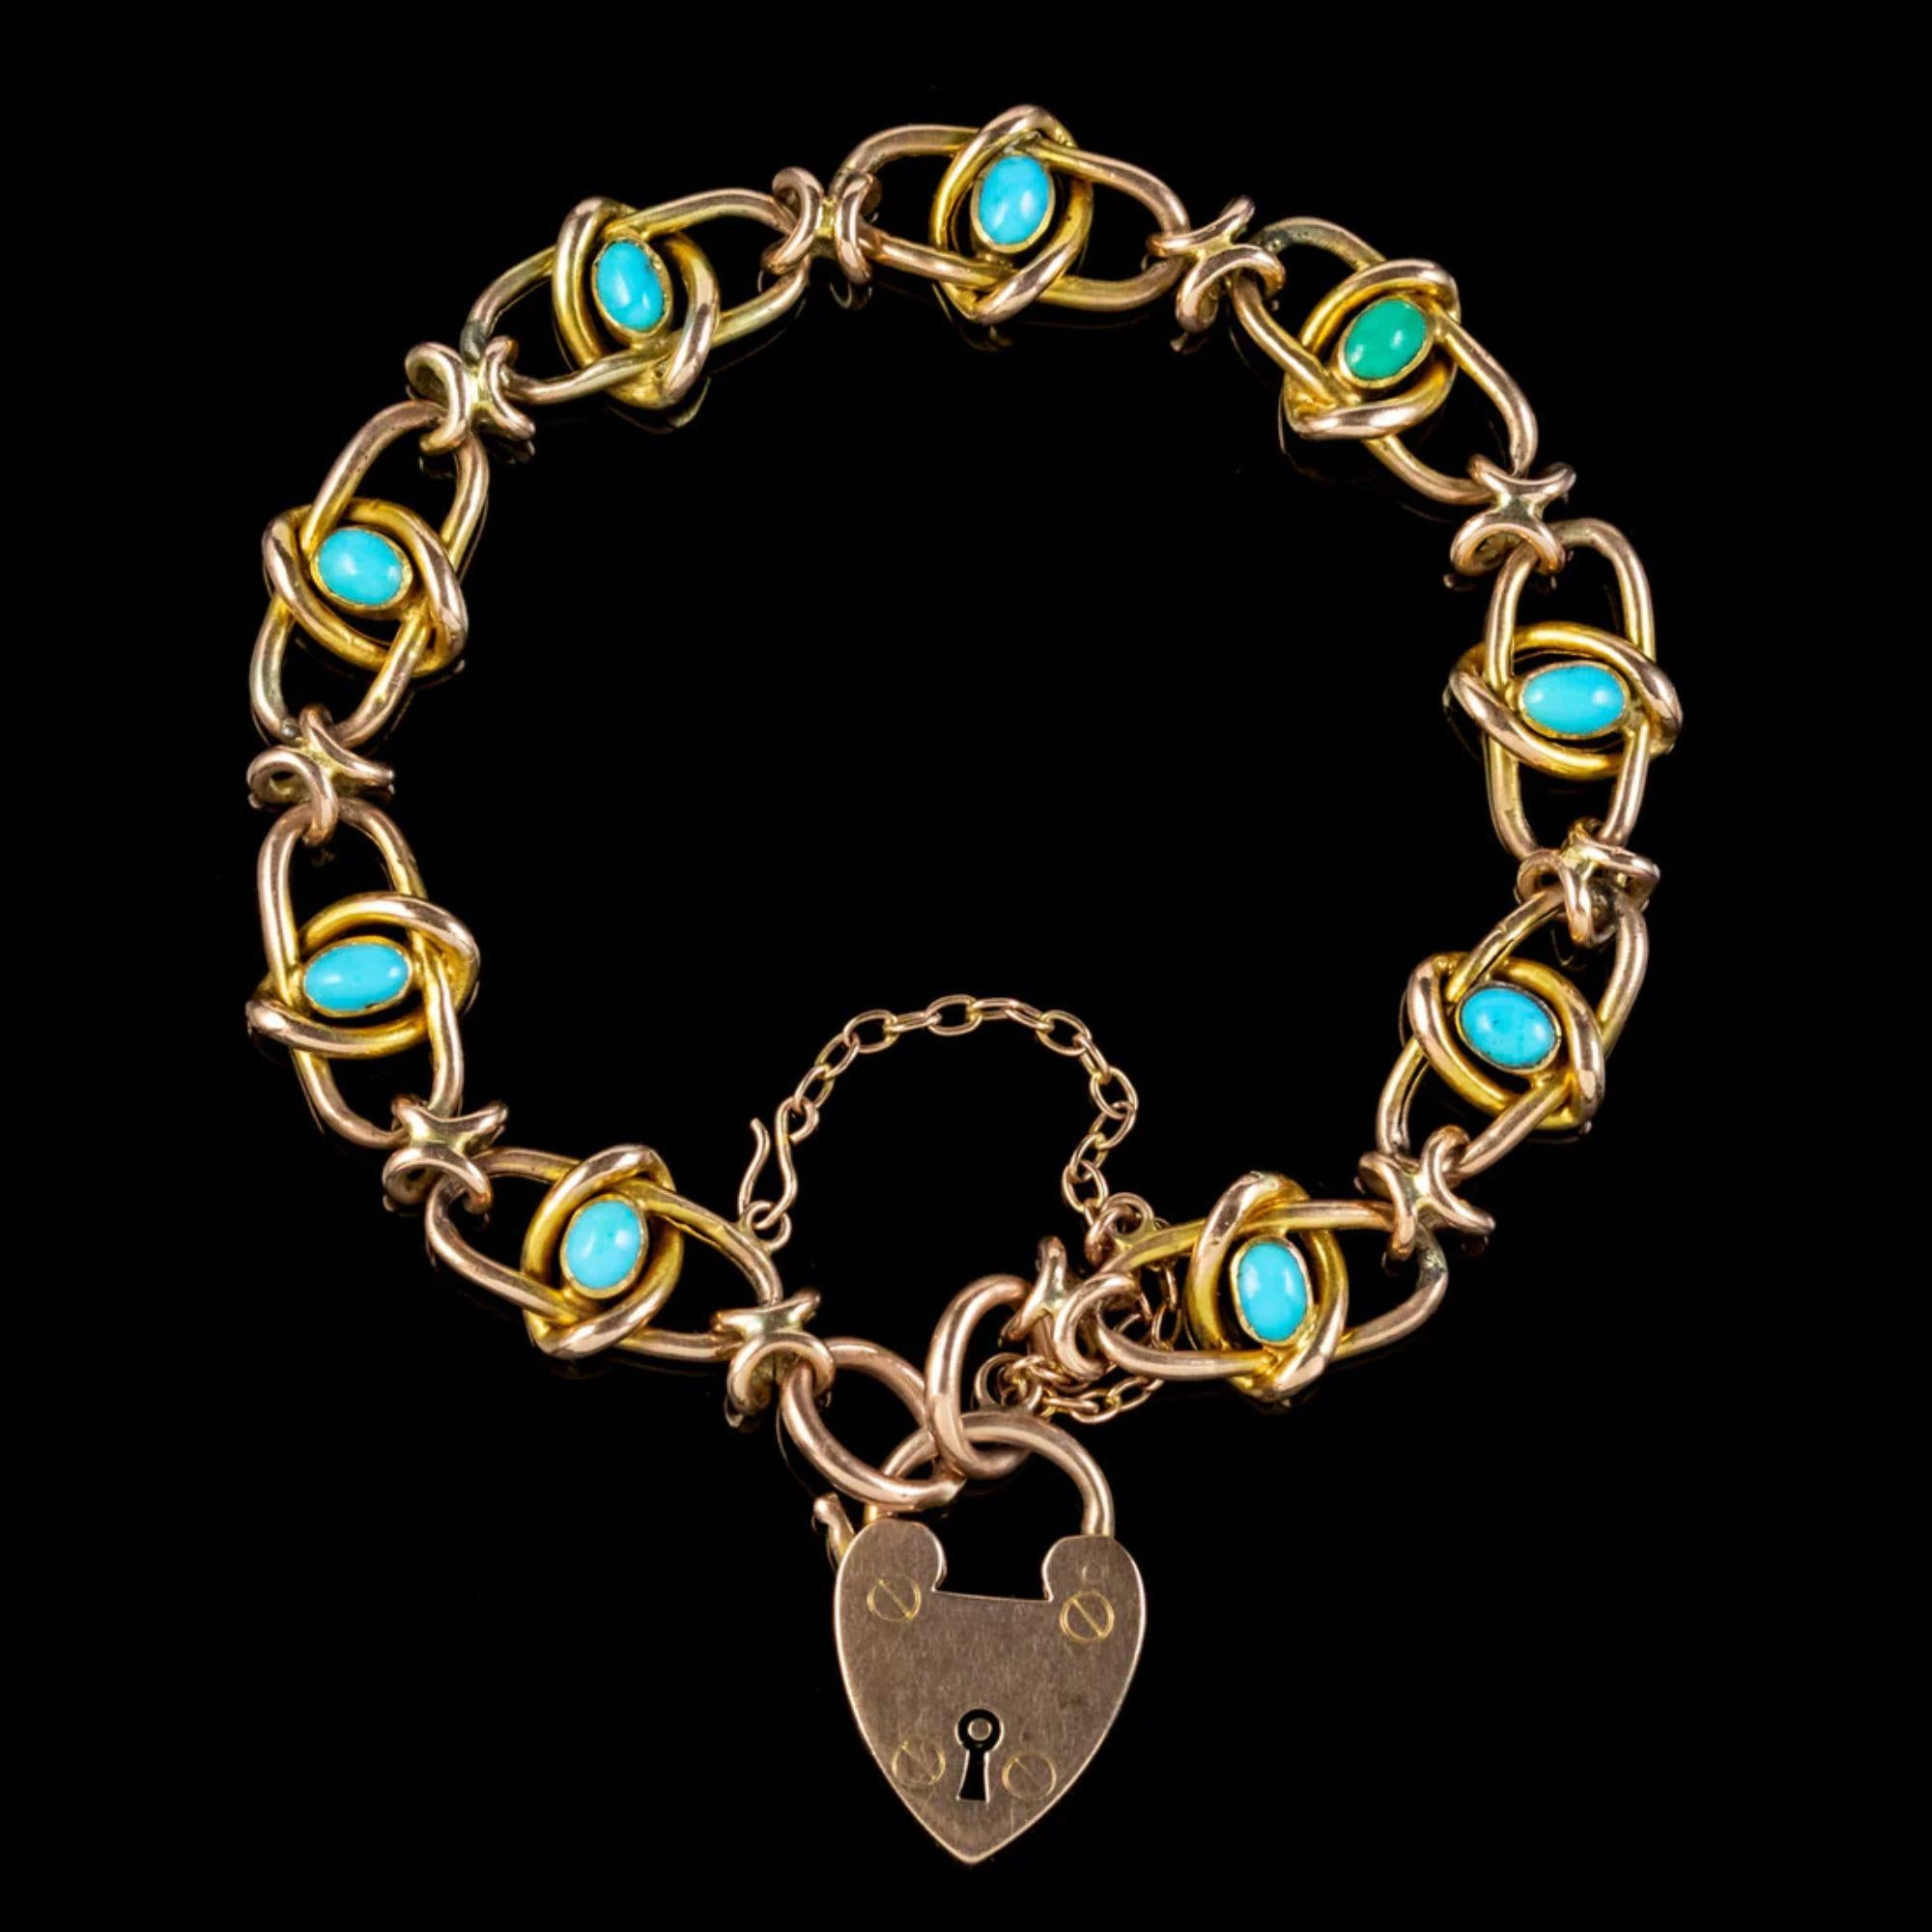 An exquisite antique Victorian bracelet from the late 19th century comprising of open-worked knot links crafted in 9ct gold and bezel set with a turquoise in the centre of each.

The turquoise have a calming blue/ green colour and have long been